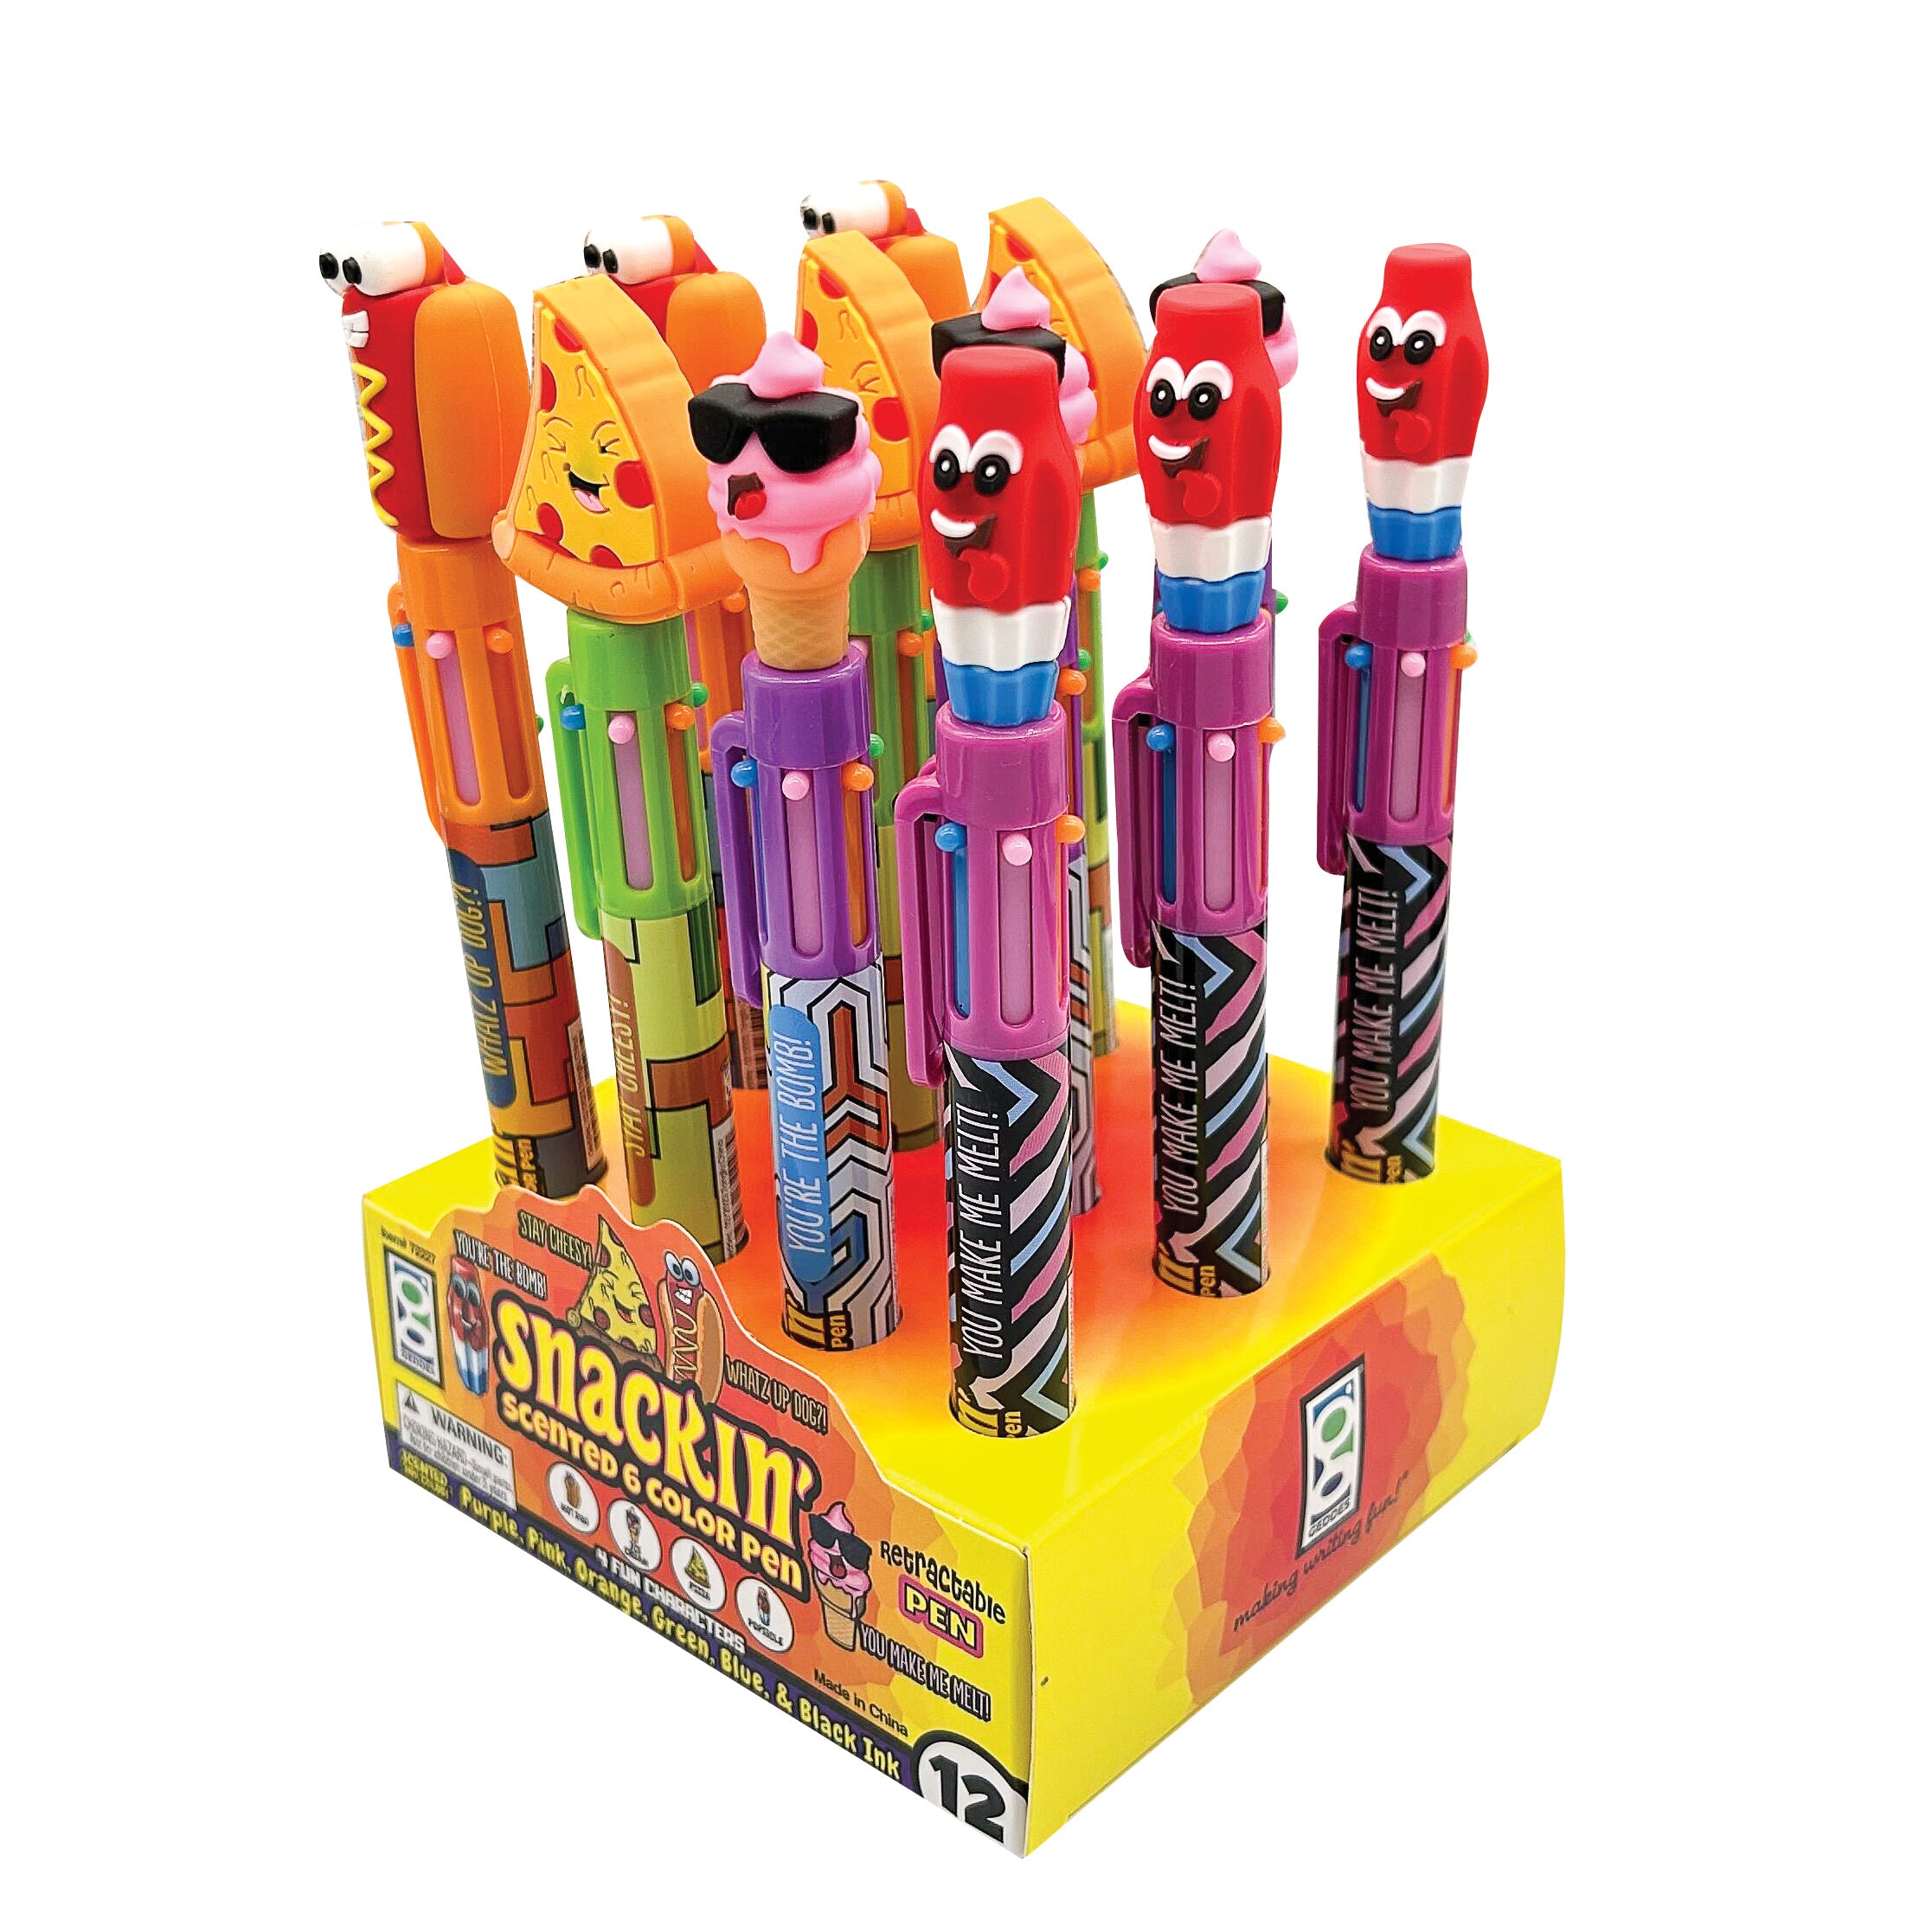 Snackin Scented 6 Color Pen